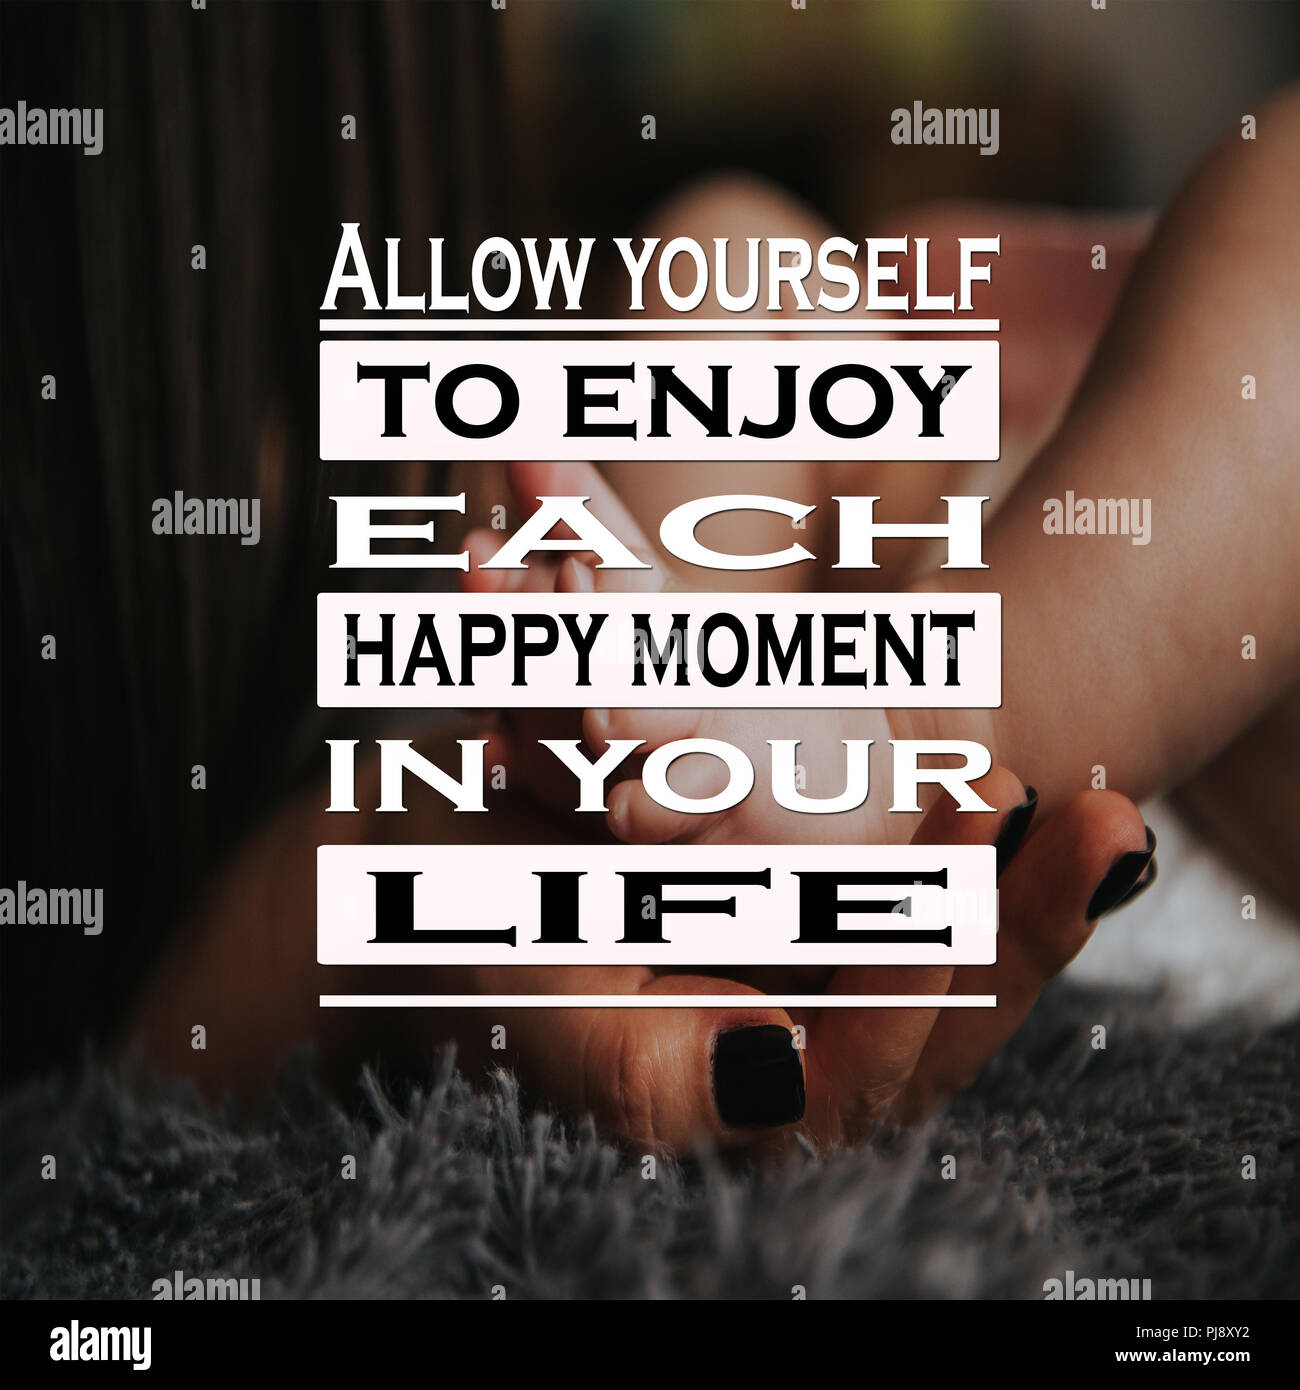 Enjoy Yourself Quotes. QuotesGram